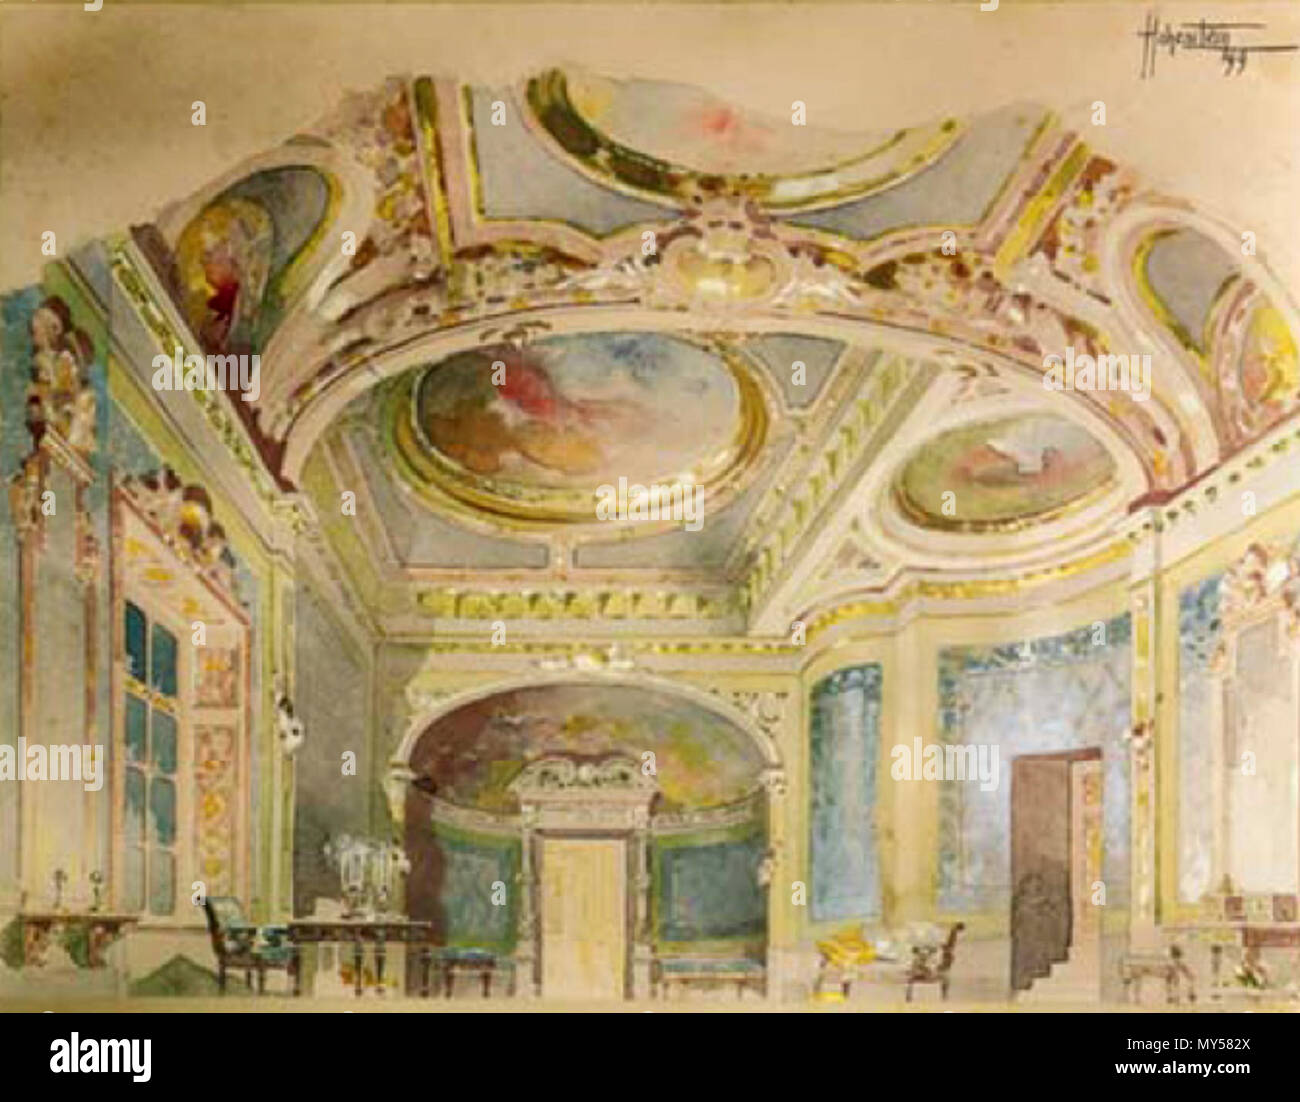 English: Set design for Act 2 of Puccini's opera Tosca (Palazzo Farnese) .  1900. Adolf Hohenstein (1854-1928) 483 Set by Hohenstein for Act 2 of Tosca  1900 Stock Photo - Alamy